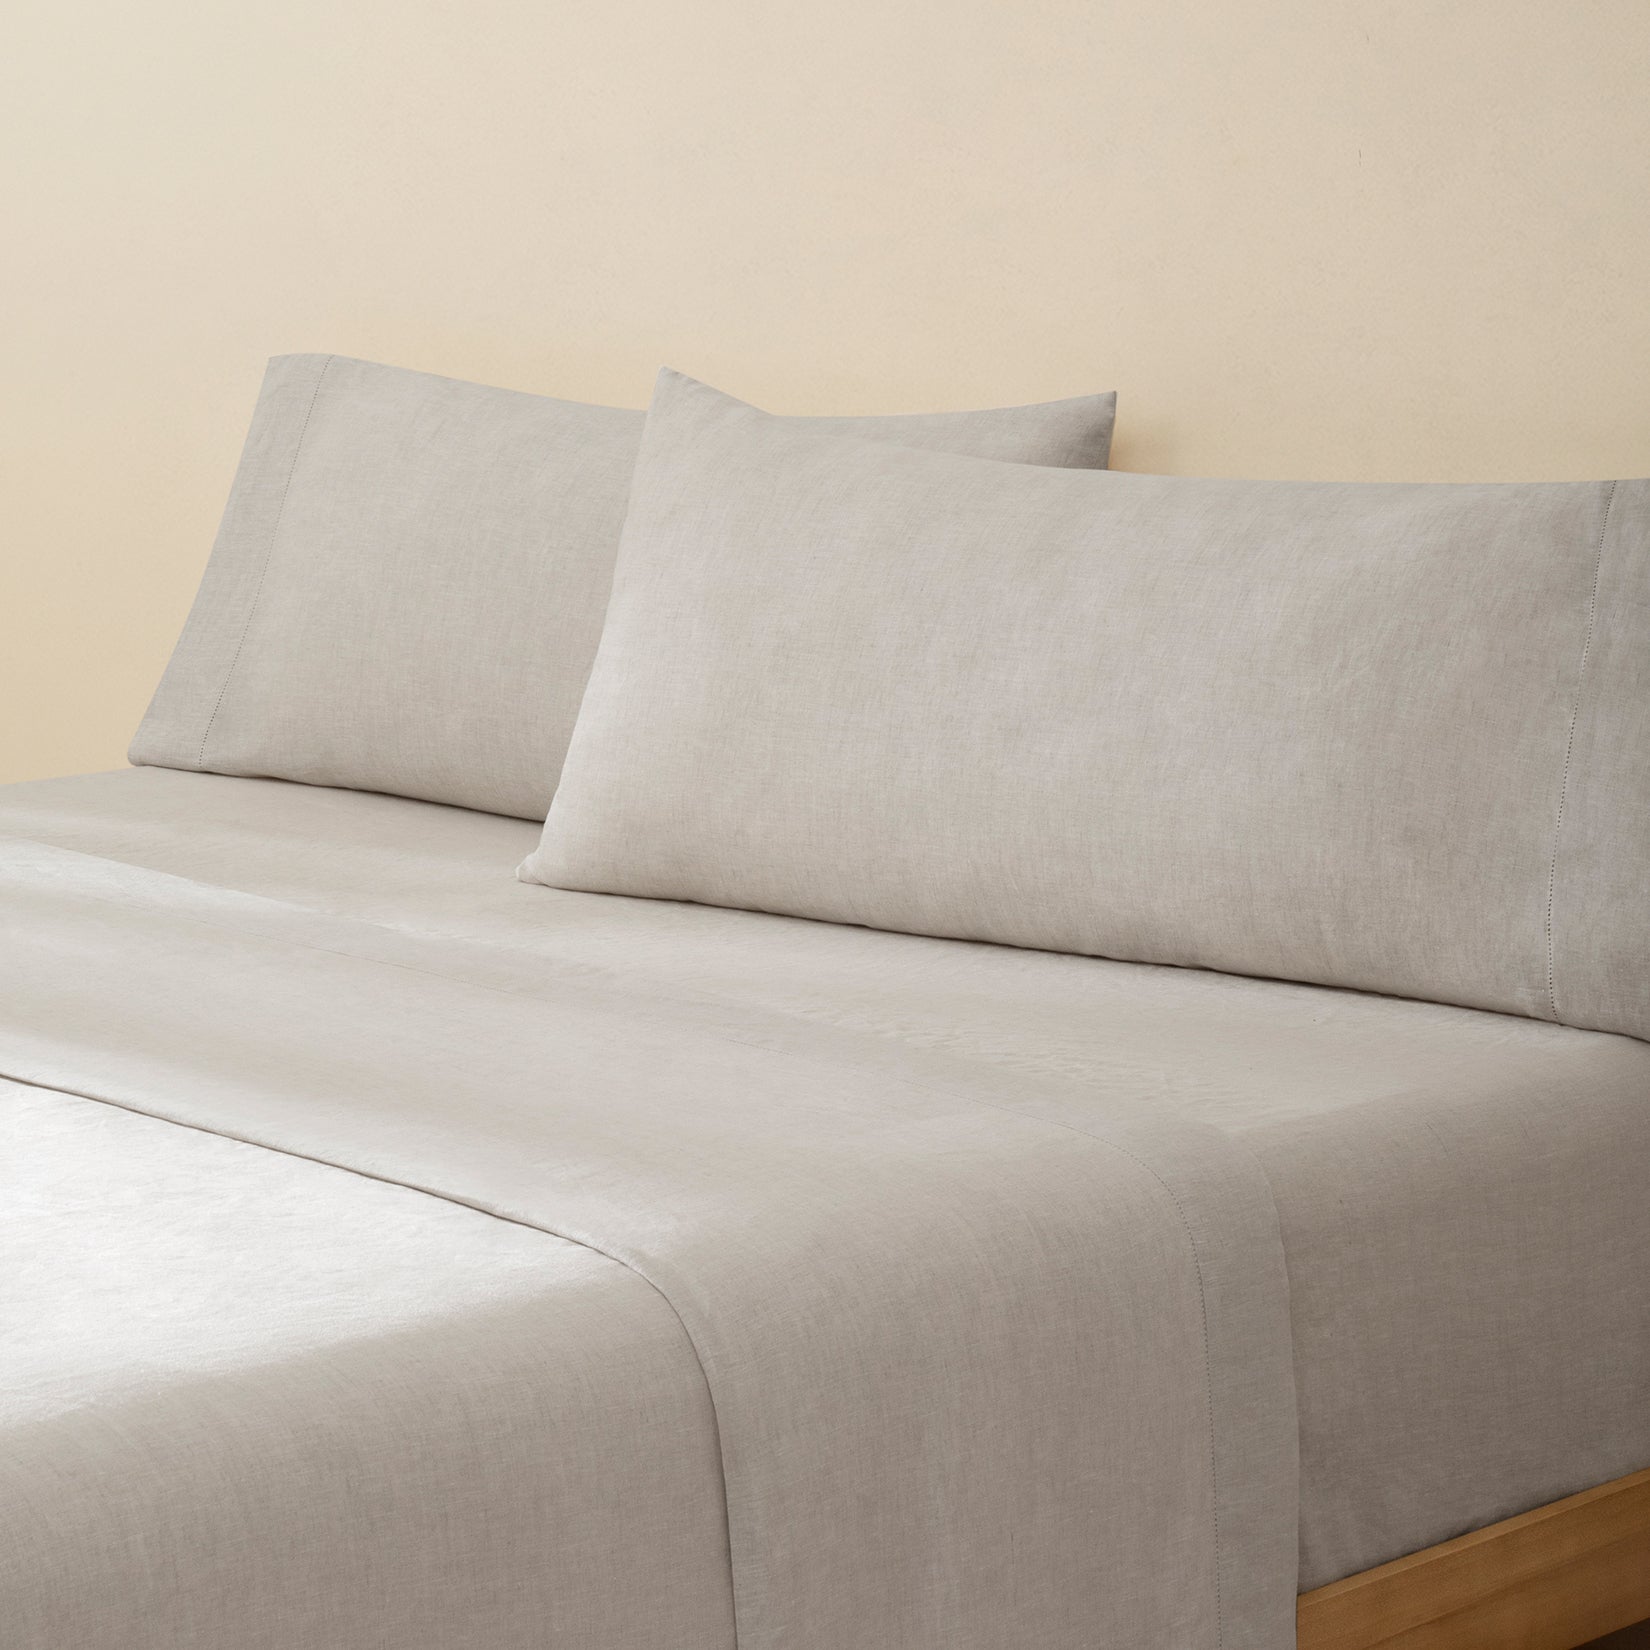 Olivia natural taupe linen bed set. Natural taupe linen pillows and natural taupe linen sheets on bed from side angle.